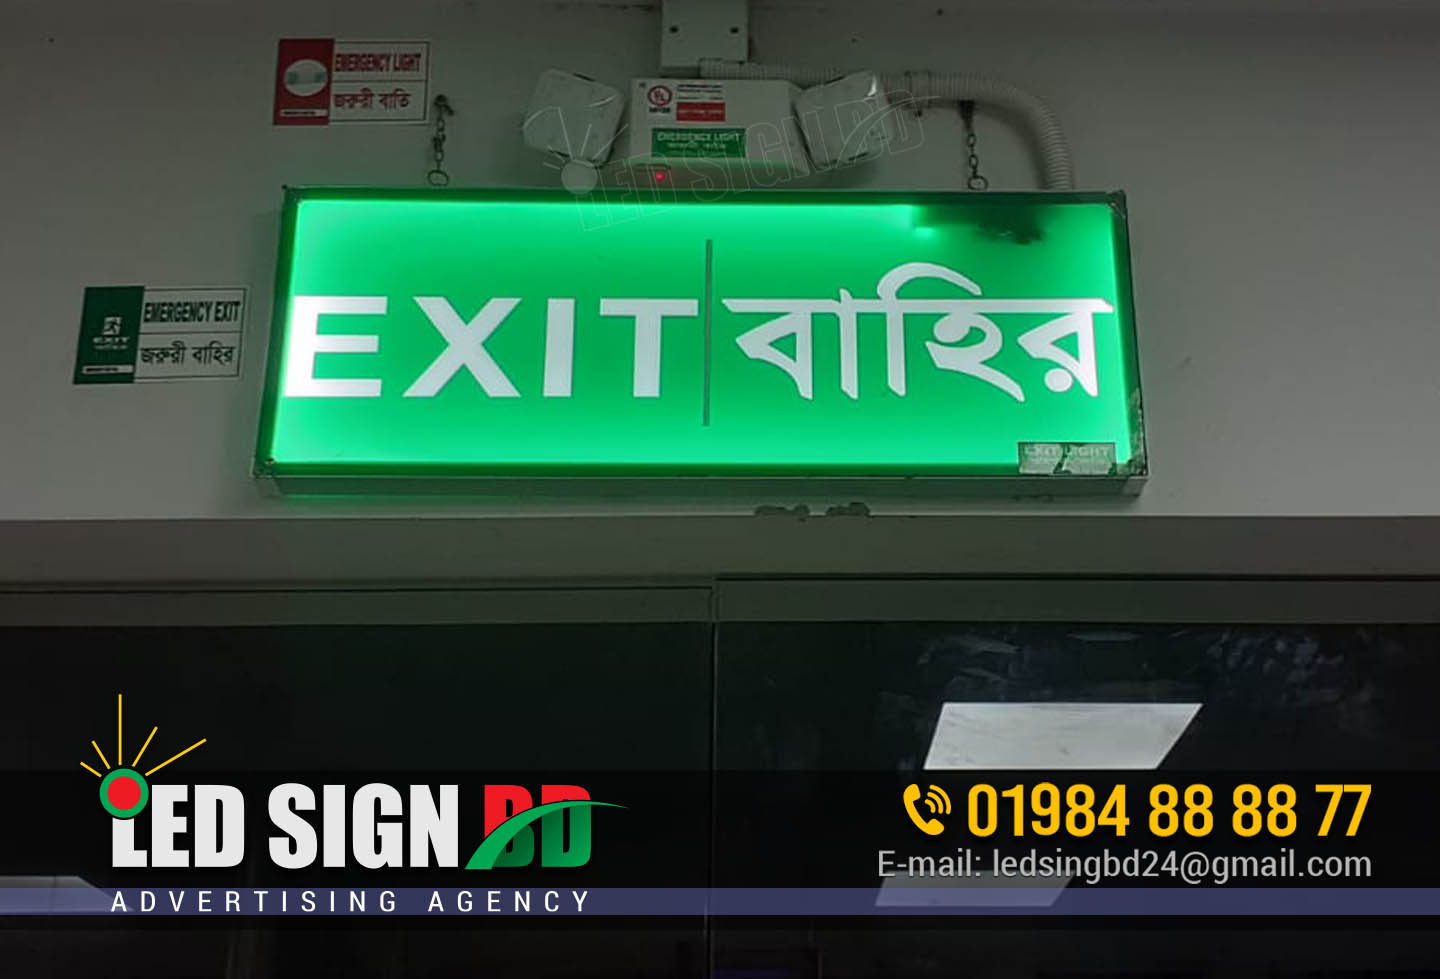 Exit Sign, Entry ‍Sign, Directional Sign, Toilet Directional Signboard Making in Dhaka Bangladesh In Dhaka, Bangladesh, Exit Sign, Entry Sign, Directional Sign, Toilet Directional Signboard making is a popular activity. This is because there is a large demand for these products in the city. There are many shops that sell these products, and the prices are very reasonable. The products are made from a variety of materials, including wood, metal, plastic, and glass. 1. Introduction 2. Materials and Methods 3. Results 4. Discussion 5. Conclusion 1. Introduction A good exit sign, entry sign, or directional sign can make all the difference in a person's ability to find their way around a building. In Dhaka, Bangladesh, there are many signboard makers who can create custom signs to meet the specific needs of a business or customer. The use of exit signs originated in the United States in the 1930s and 1940s, when they were required in movie theaters by the Motion Picture Association of America. Today, exit signs are required in all public buildings in the United States by the National Fire Protection Association. Entry signs and directional signs are not required by any code or law, but they can be very helpful in assisting people to find their way around a building. Businesses, schools, and other organizations often use entry signs and directional signs to help visitors and customers locate specific areas or rooms within the building. Toilet directional signs are also commonly used in public places, such as malls, restaurants, and office buildings. These signs help to direct people to the nearest toilet, and often include information about the nearest exit in case of an emergency. Signboard makers in Dhaka, Bangladesh can create custom signs for any need. Whether you are looking for an exit sign, entry sign, directional sign, or toilet directional sign, there is a signboard maker in Dhaka who can create a sign that meets your needs. 2. Materials and Methods In Dhaka, Bangladesh, the most common materials used to make exit signs, entry signs, and directional signs are wood, metal, and plastic. To make a signboard, one must first determine the size and shape of the sign. The next step is to cut the material to the desired size and shape using a saw. After the material is cut to size, the next step is to drill holes for the screws that will attach the sign to the wall. Once the holes are drilled, the next step is to paint the sign. Finally, the last step is to attach the sign to the wall using screws. The most common method for making exit signs, entry signs, and directional signs in Dhaka, Bangladesh is through the use of a saw. This is because a saw is able to quickly and easily cut through wood, metal, and plastic. The saw is also able to create clean and straight lines, which is necessary for creating a professional looking sign. Another common method for making exit signs, entry signs, and directional signs in Dhaka, Bangladesh is through the use of a drill. This is because a drill is able to quickly and easily create holes for the screws that will attach the sign to the wall. A drill is also able to create clean and straight lines, which is necessary for creating a professional looking sign. The last common method for making exit signs, entry signs, and directional signs in Dhaka, Bangladesh is through the use of a paintbrush. This is because a paintbrush is able to quickly and easily apply paint to the sign. A paintbrush is also able to create clean and straight lines, which is necessary for creating a professional looking sign. 3. Results In Dhaka Bangladesh, there are many exit signs, entry signs, directional signs, and toilet directional signboards. These signboards are used to help people find their way around the city. The signboards are made from different materials, such as wood, metal, and plastic. The signboards are also made in different sizes, depending on the needs of the customer. The signboards are made to help people find their way around the city, and they are also used to help people find their way to the toilet. 4. Discussion There are various types of signboards that are used in Bangladesh for directing people. The most common ones are exit sign, entry sign, and directional sign. Exit sign is used to indicate the path of escape in case of fire or other emergency. Entry sign is used to mark the entrance of a building. Directional sign is used to show the way to various places inside a building. Toilet directional signboard is used to show the way to the nearest toilet. The material used for making signboards in Bangladesh is mostly plywood. The reason for this is that plywood is inexpensive and easy to work with. Moreover, it is also sturdy and can withstand the harsh weather conditions of Bangladesh. The process of making signboards in Bangladesh is generally done by hand. First, the plywood is cut into the desired shape and size. Then, the graphics or text is printed on the plywood. Finally, the signboard is ready to be installed. There are various benefits of using signboards in Bangladesh. First of all, they help in directing people to the desired location. Secondly, they help in reducing the chances of accidents. Thirdly, they help in saving time. Lastly, they help in creating a good impression on the visitors. 5. Conclusion The Exit Sign, Entry Sign and Directional Sign are all very important in Bangladesh. They are used to guide people to the correct places and to keep them safe. The Toilet Directional Signboard is also very important as it helps people to find the toilets easily. All of these products are made in Dhaka and are of very good quality. The article discusses the process of making exit signs, entry signs, and directional signs in Dhaka, Bangladesh. The process involves cutting and shaping the signs out of wood, then painting them with bright colors. The finished signs are then hung up in public places to help people find their way around. arrow direction sign board. directional signage. sign board design maker. direction sign board design. arrow direction sign board. creative signboard design ideas. direction sign board design template. sign board ideas design. direction sign board images. entry restricted sign. directional sign boards. signboard road. sign board dhaka. directional signage board. directional signage design. direction sign board design. digital sign board in dhaka. signage bd. signboard price. led panel sign board. electronic sign board. bangla sign board design. led display panel price in bangladesh. custom neon sign. signboard price. digital sign board in dhaka. signage bd. electronic sign board. led panel sign board. led display panel price in bangladesh. bangla sign board design. custom neon sign. sign board dhaka. directional sign boards. exit sign price in bangladesh. signboard bus stop. sign board bus stand. sign board direction.